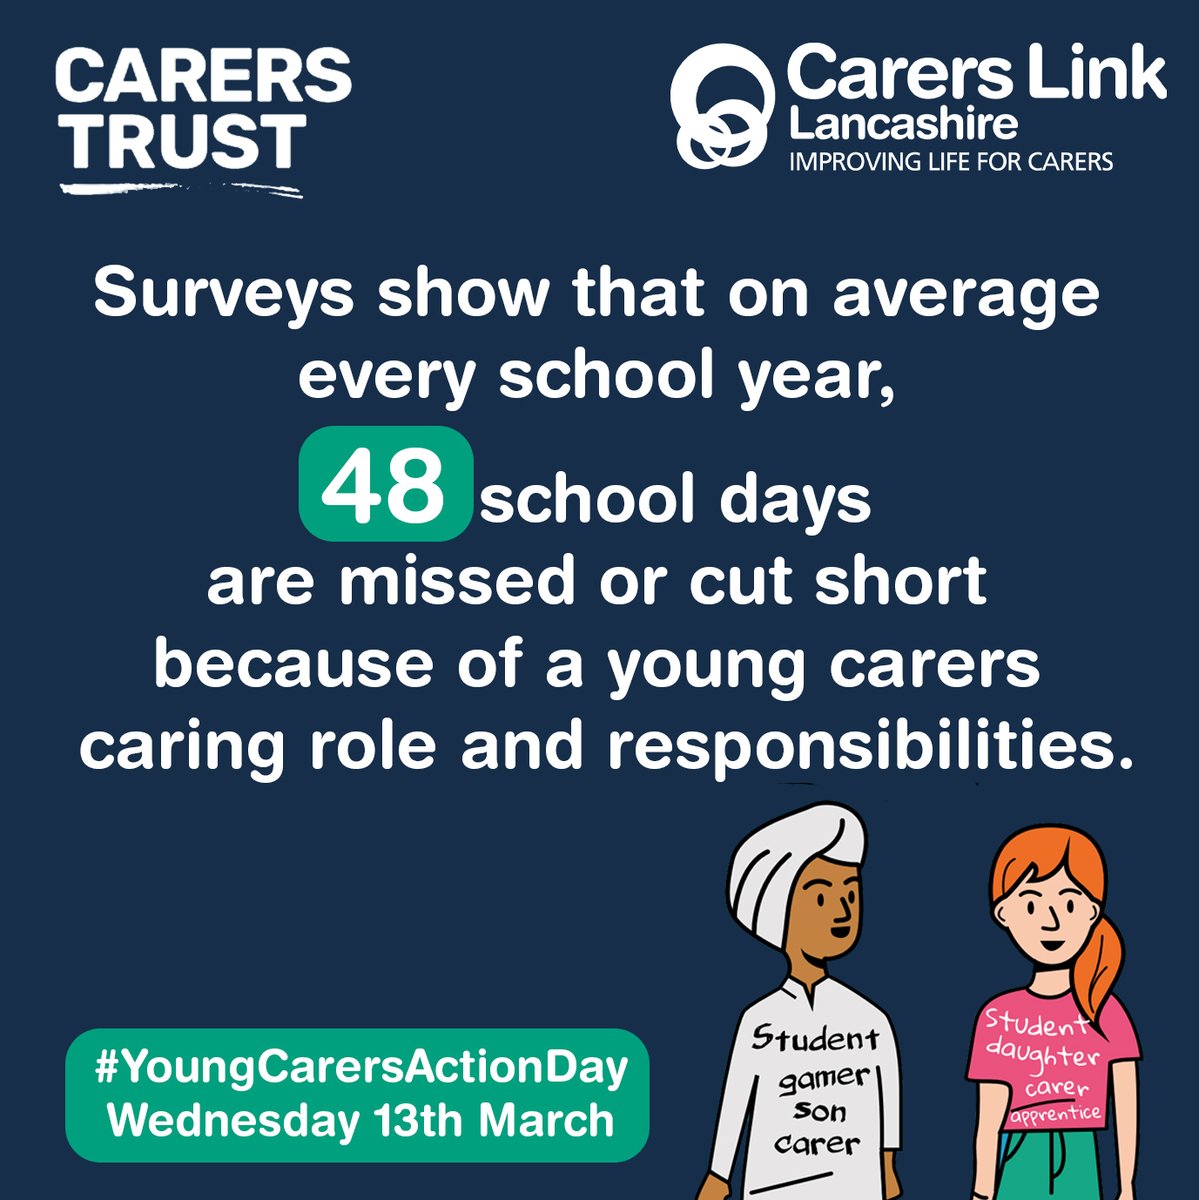 #YOUNGCARERSACTIONDAY is 4 days away
Raise awareness around young carers with us to help achieve #fairfuturesforyoungcarers